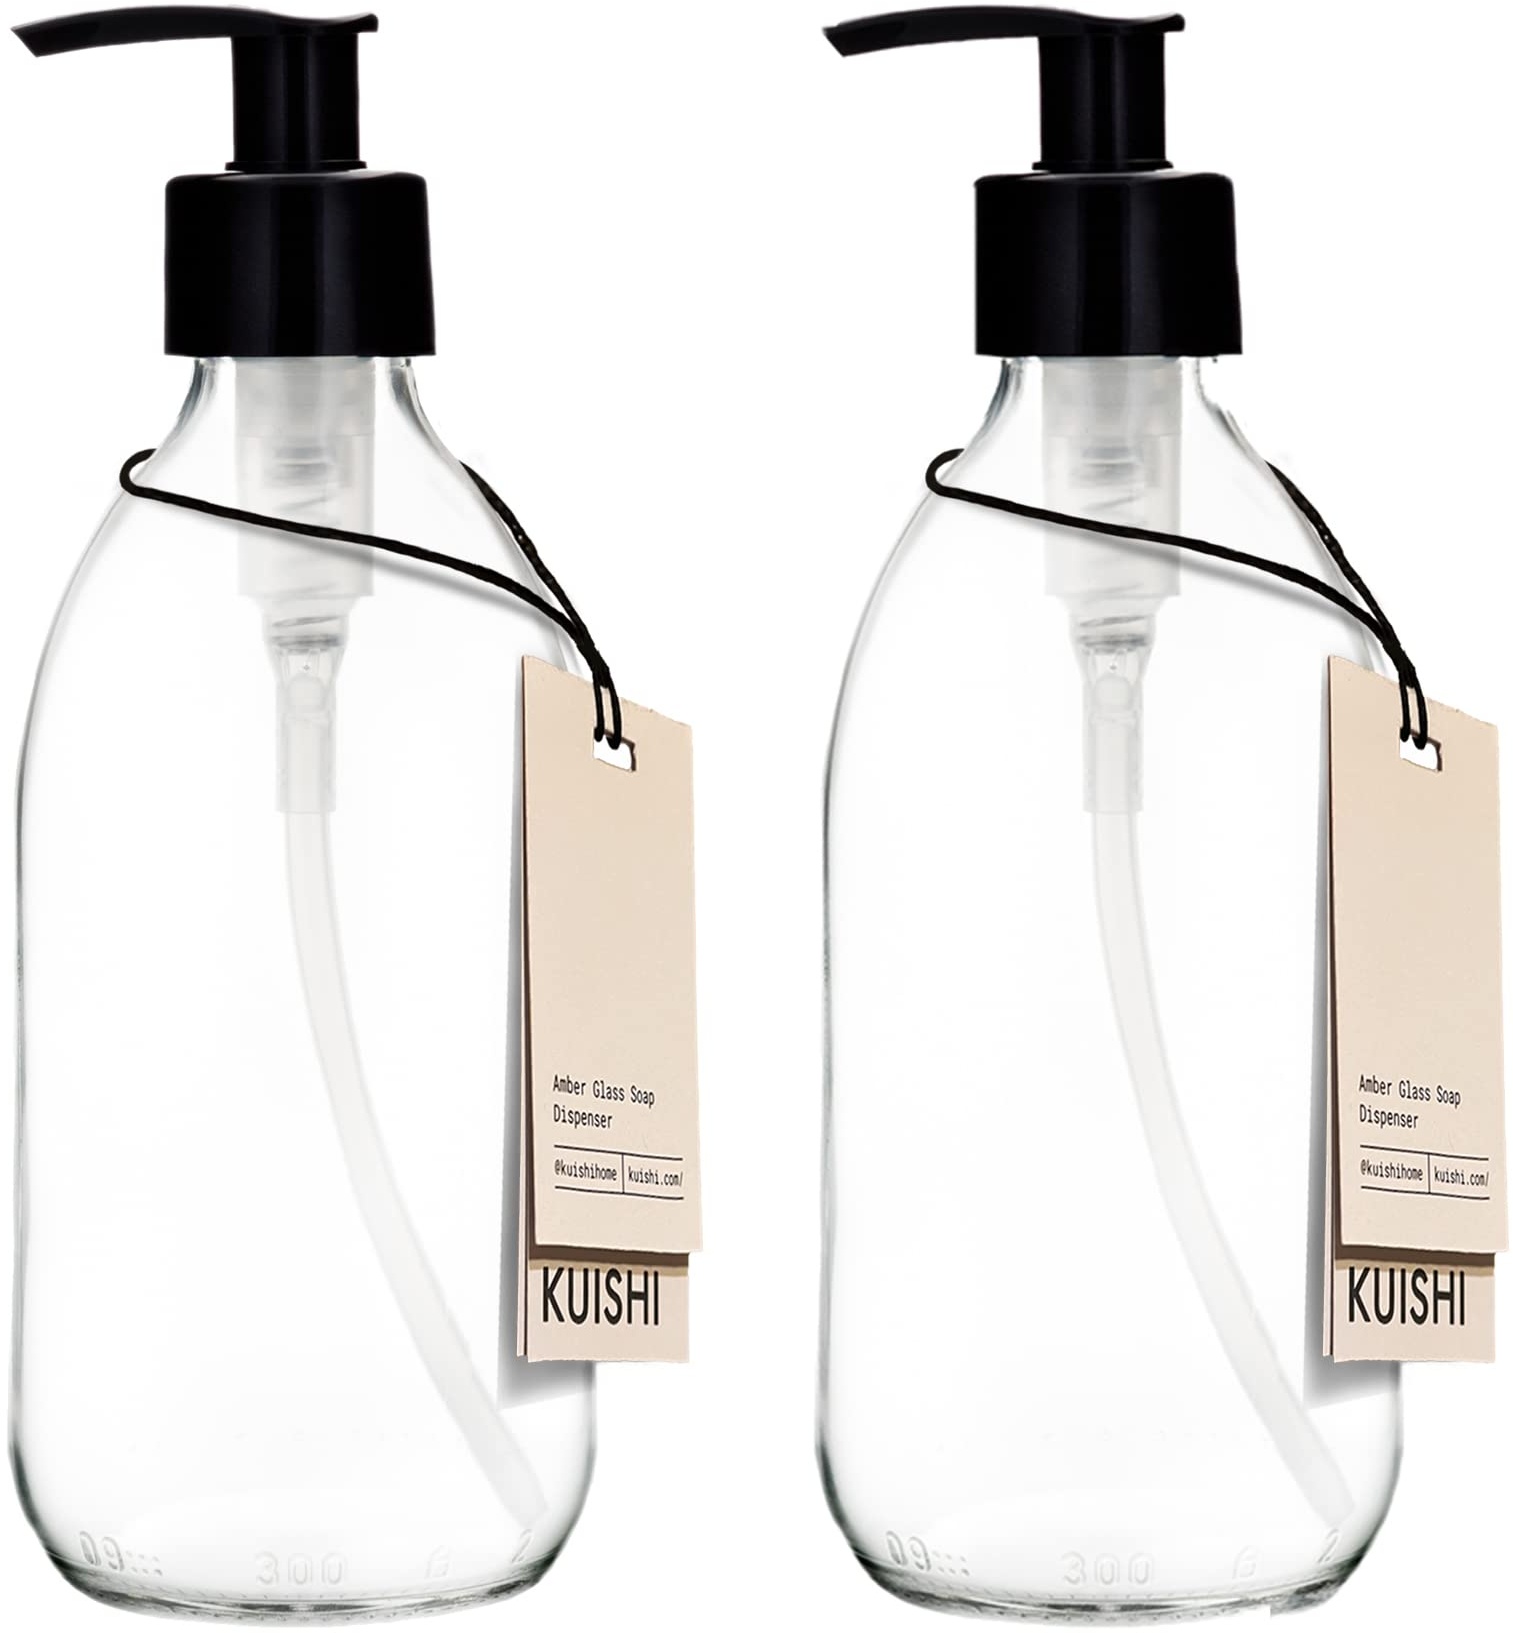 Kuishi Clear Glass Soap Dispenser with Pump [300ml Pack of 2], Clear Soap Dispenser with Black Plastic Pump (BPA-Free), Glass Shampoo Bottles Ideal for Handwash, Conditioner, Shower Gel